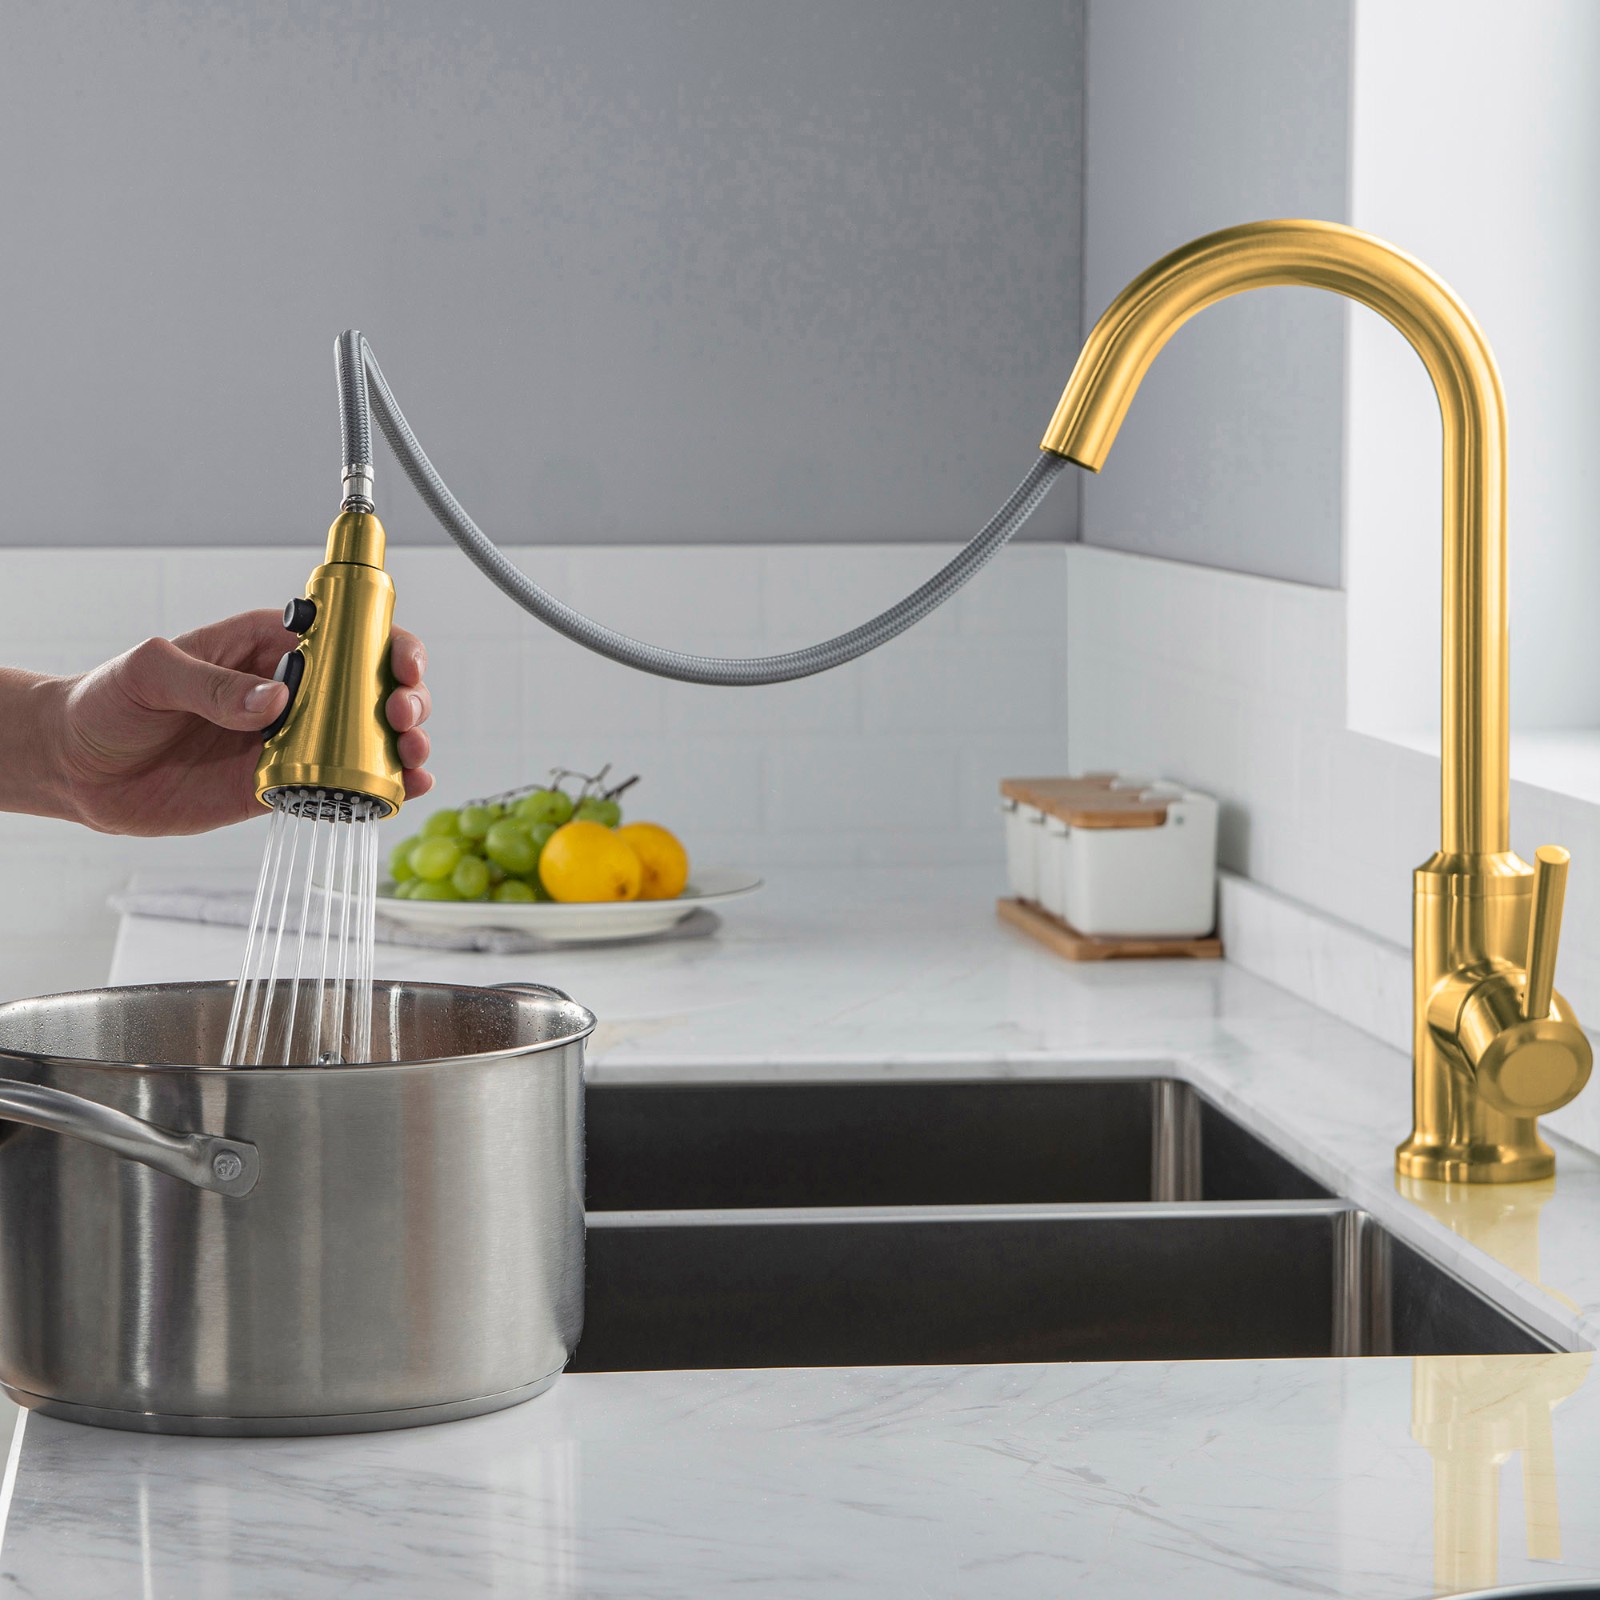  WOODBRIDGE WK101201BG Stainless Steel Single Handle Pull Down Kitchen Faucet in Brushed Gold Finish._4984